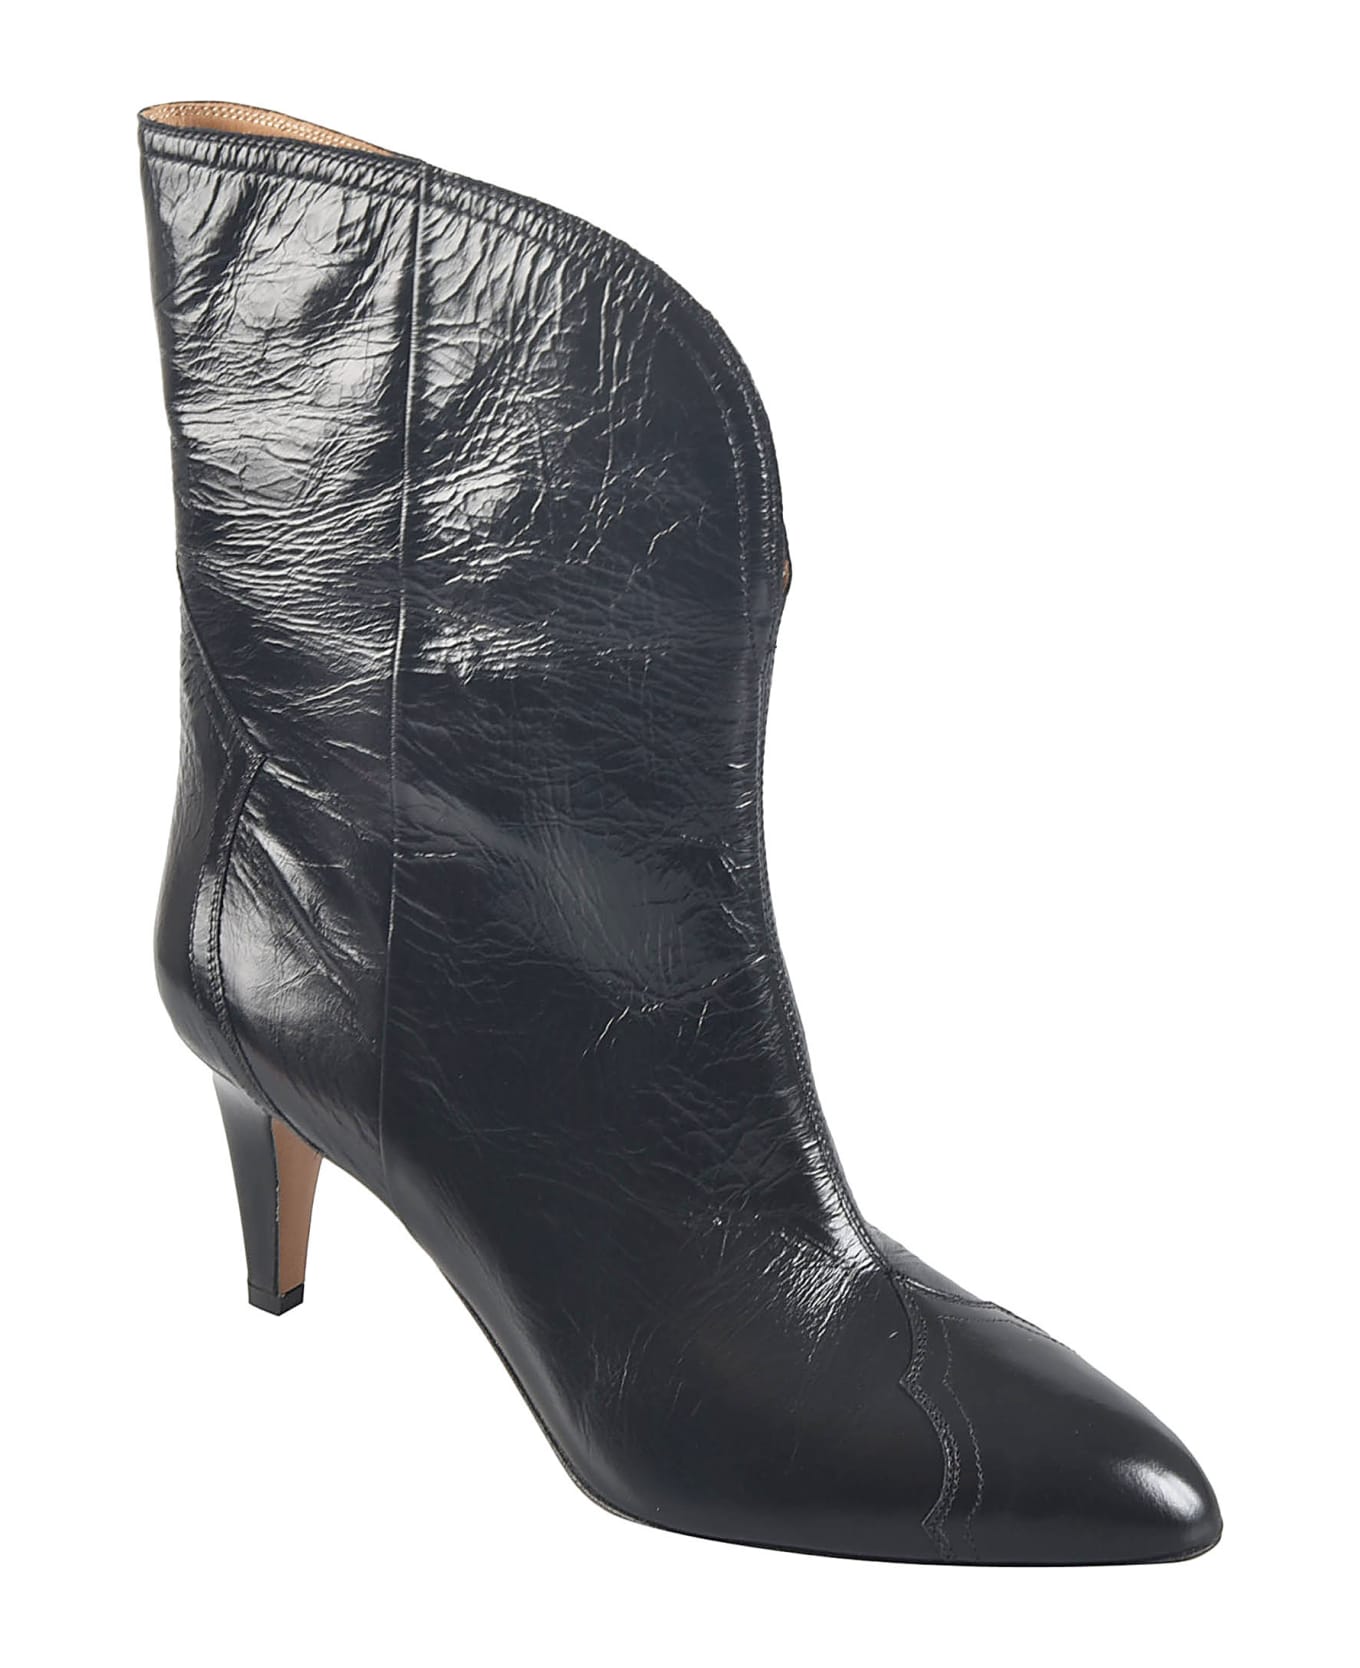 Isabel Marant Dytho High Heels Ankle Boots - Black ブーツ